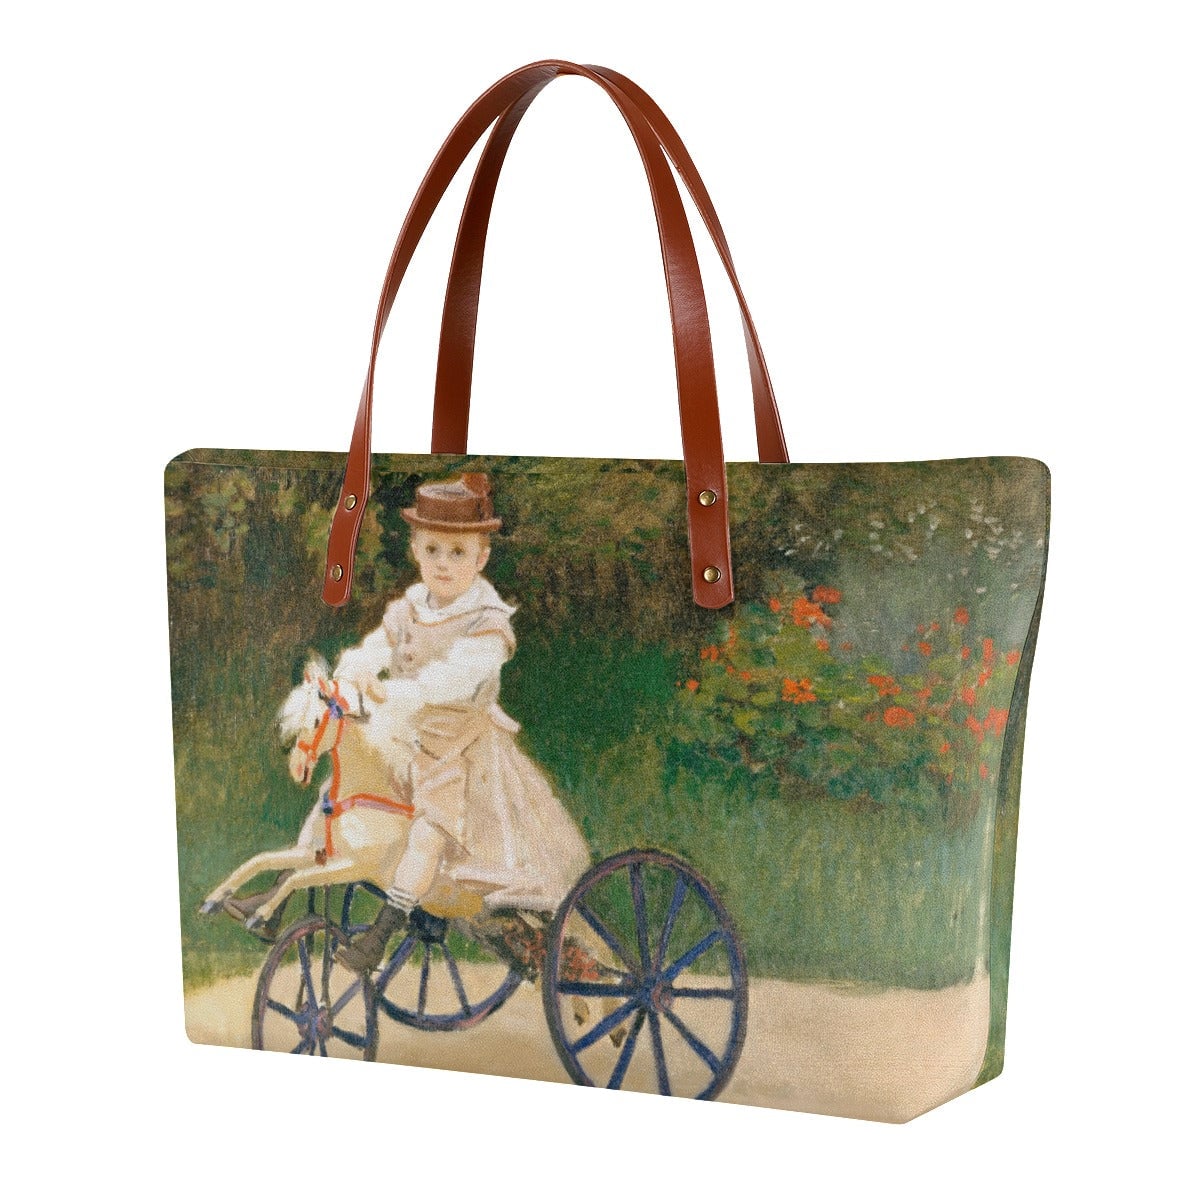 Jean Monet on His Hobby Horse by Claude Monet Tote Bag